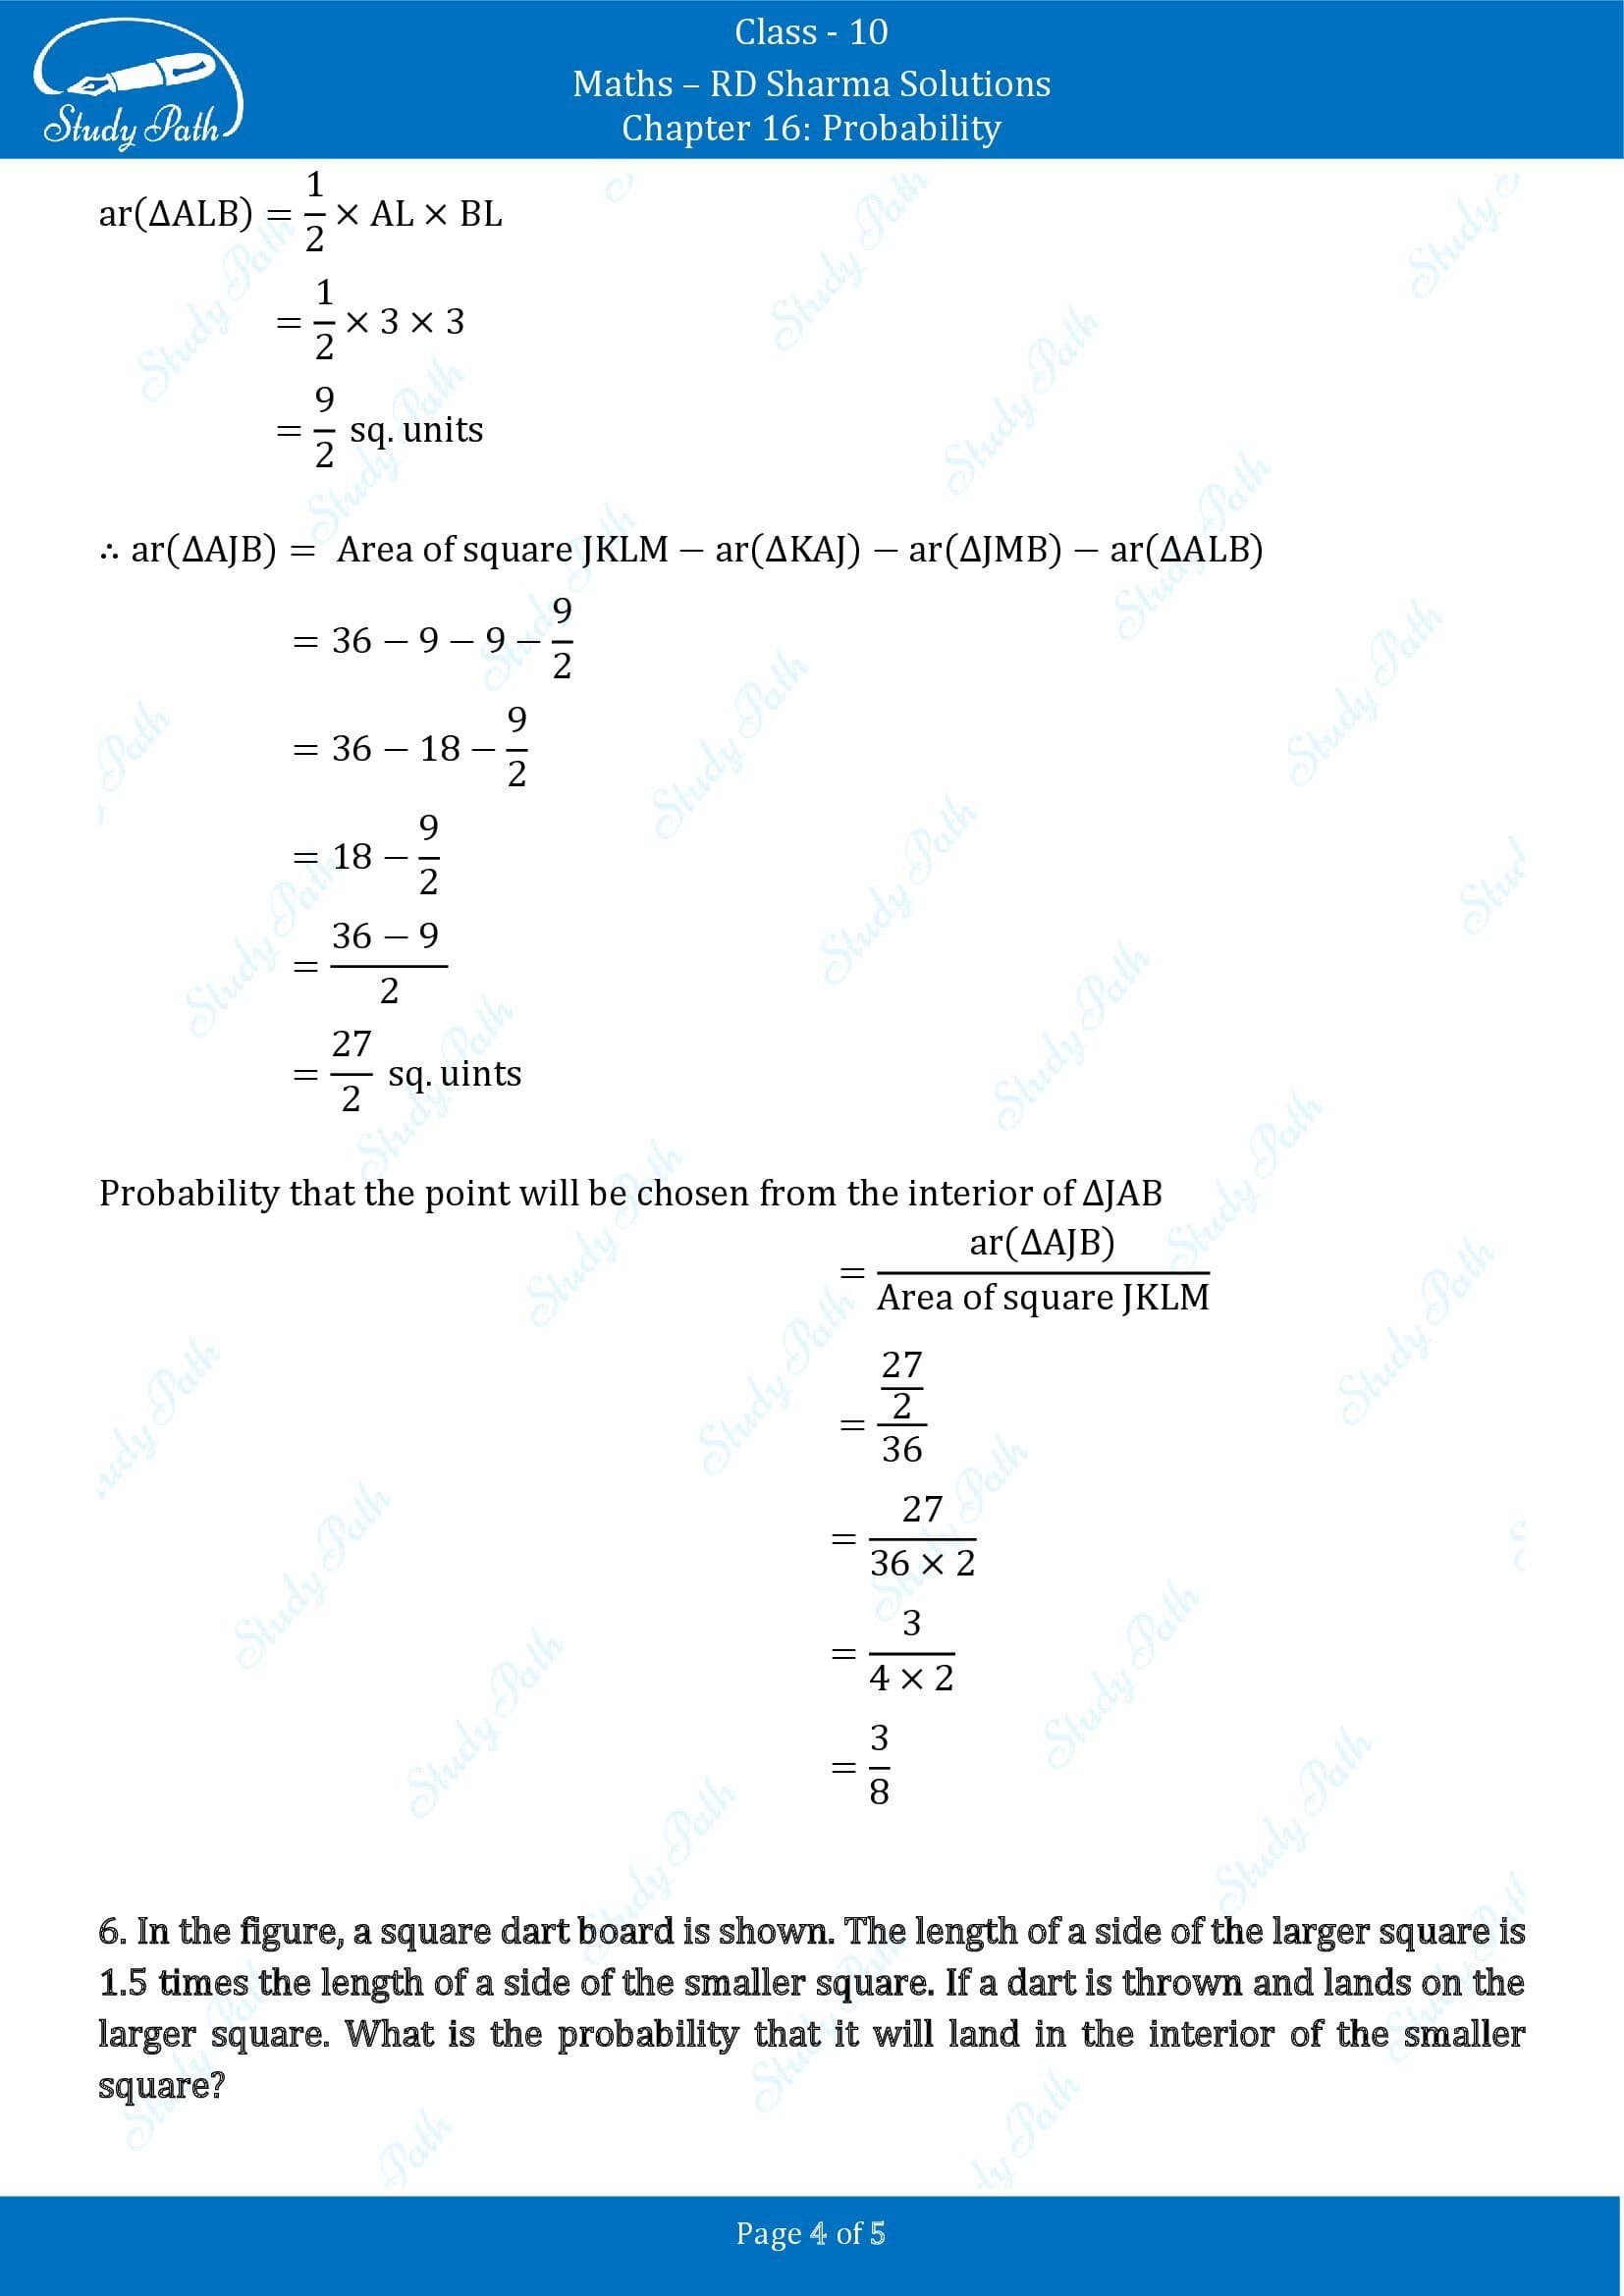 RD Sharma Solutions Class 10 Chapter 16 Probability Exercise 16.2 00004